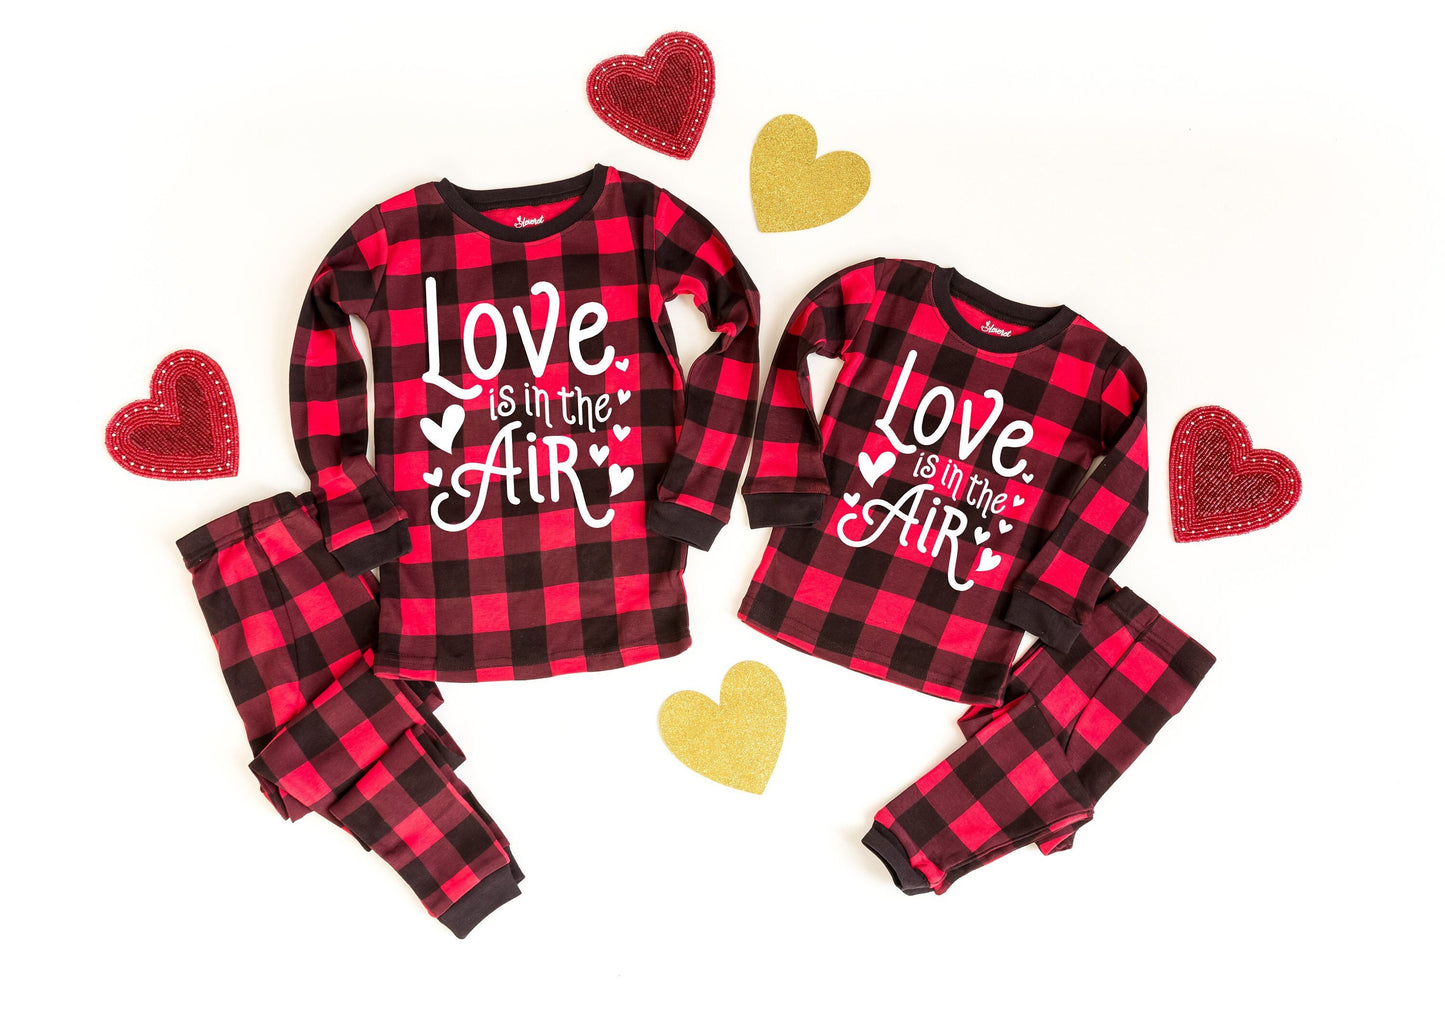 Love is in the Air Buffalo Plaid Pajamas, mommy and me pjs, valentines pajamas for the family, dog pajamas, family pajamas, valentines day